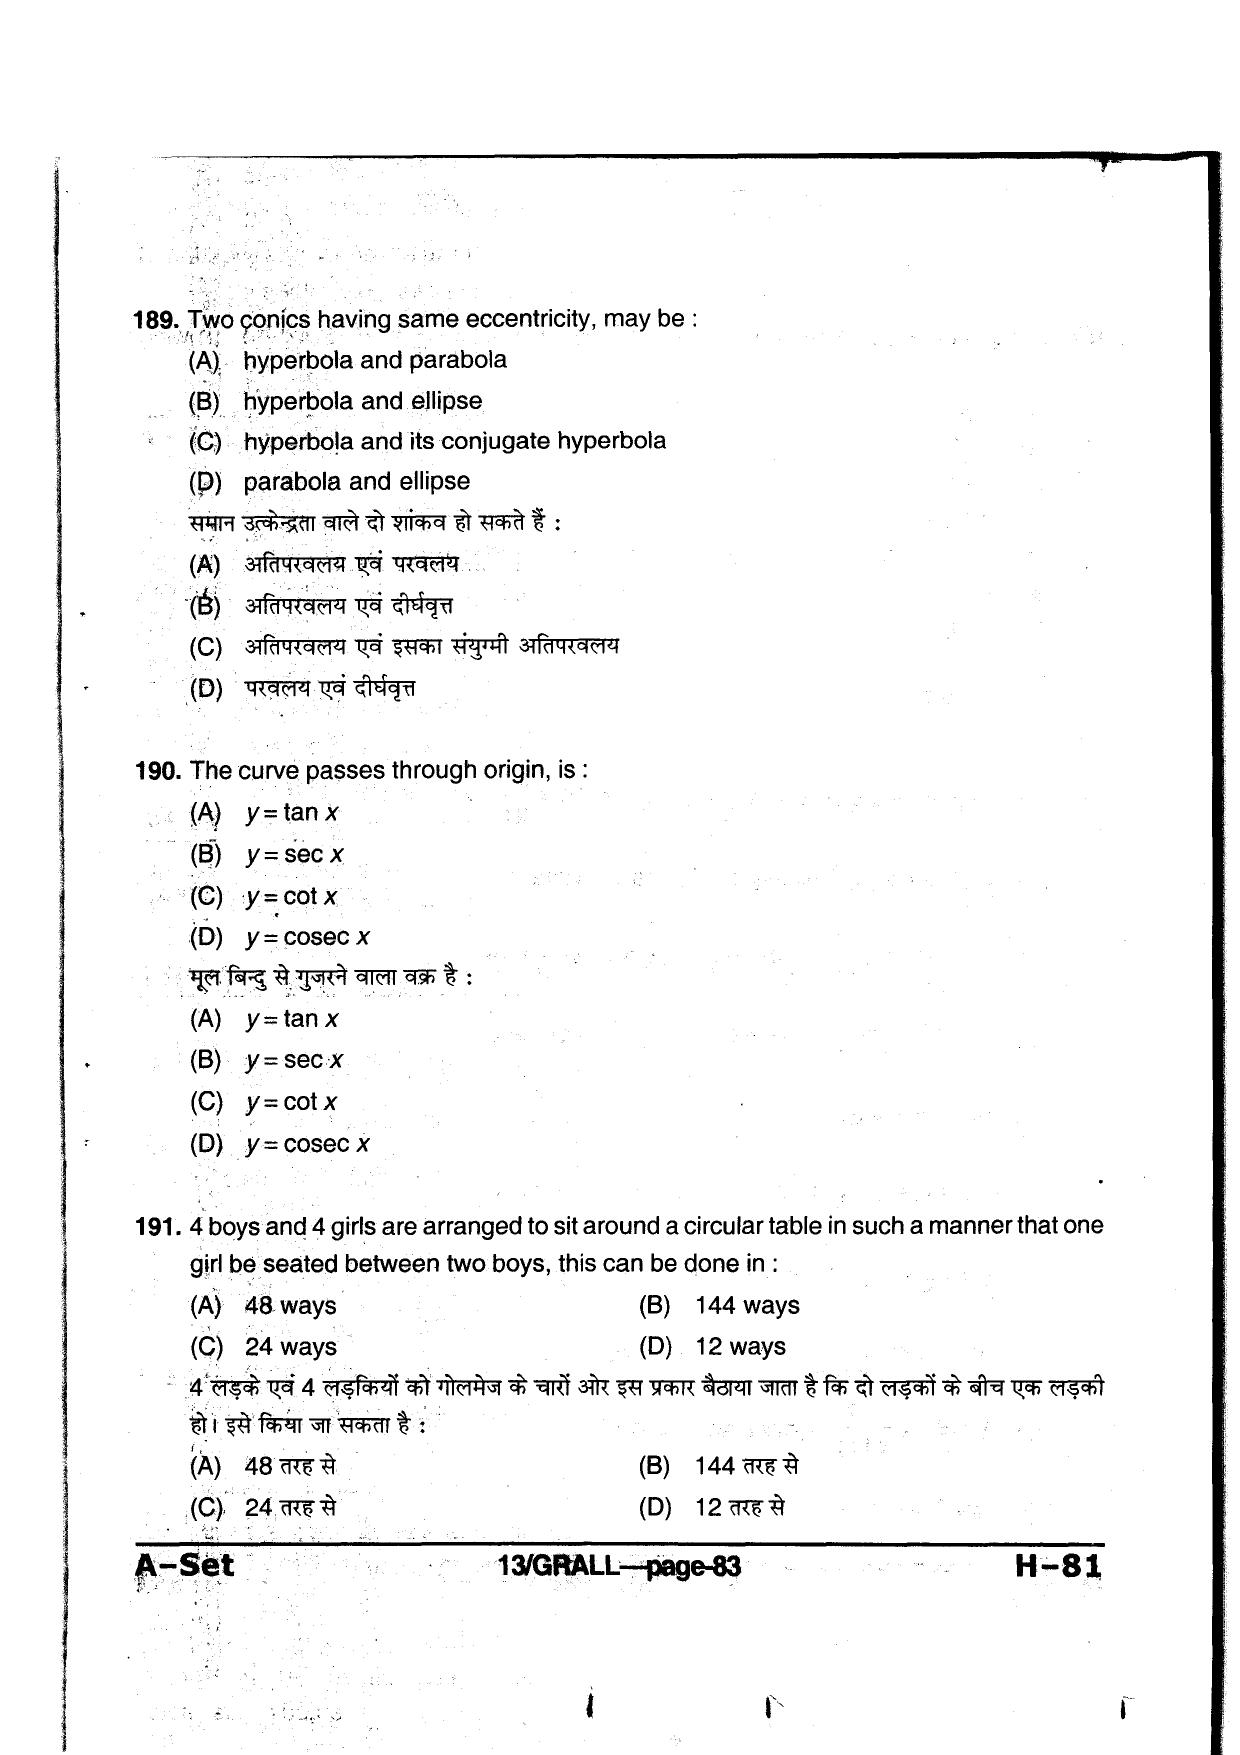 MP PAT 2013 Question Paper - Paper I - Page 83